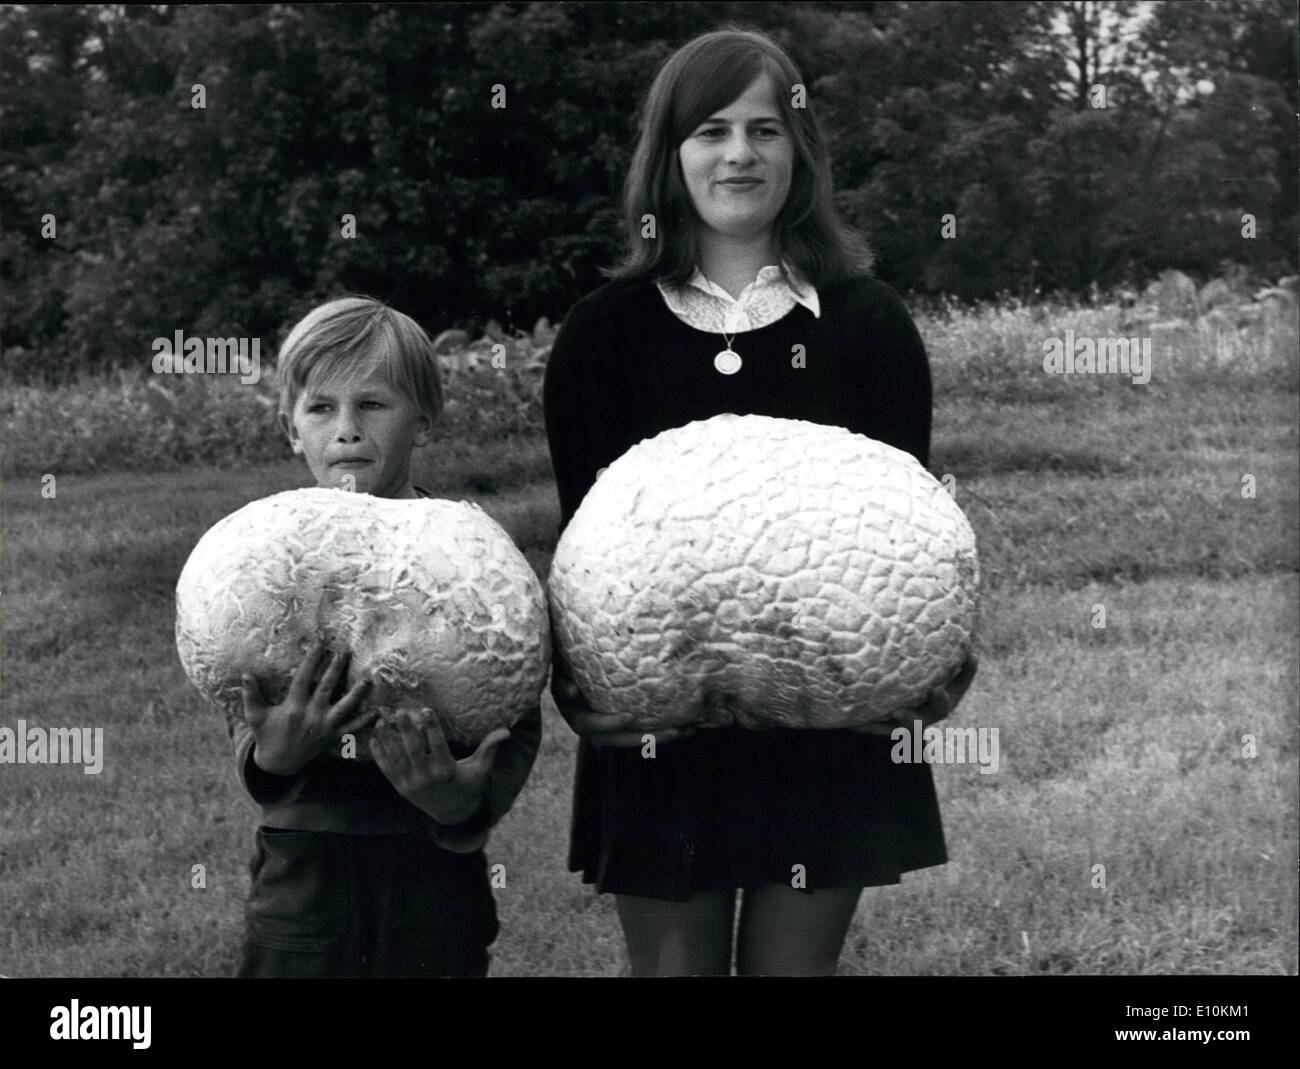 Jul. 07, 1973 - A very rich Mushroom Harvest; The family Bieri in Eschholzmatt, canton of Lucerne, is very proud of their rich mushroom harvest. Son Roman found a bovist mushroom with a weight of 9,250 kilogram, another of 5,500 kilograms. People rallied from all around to see these gigantic mushrooms. Stock Photo